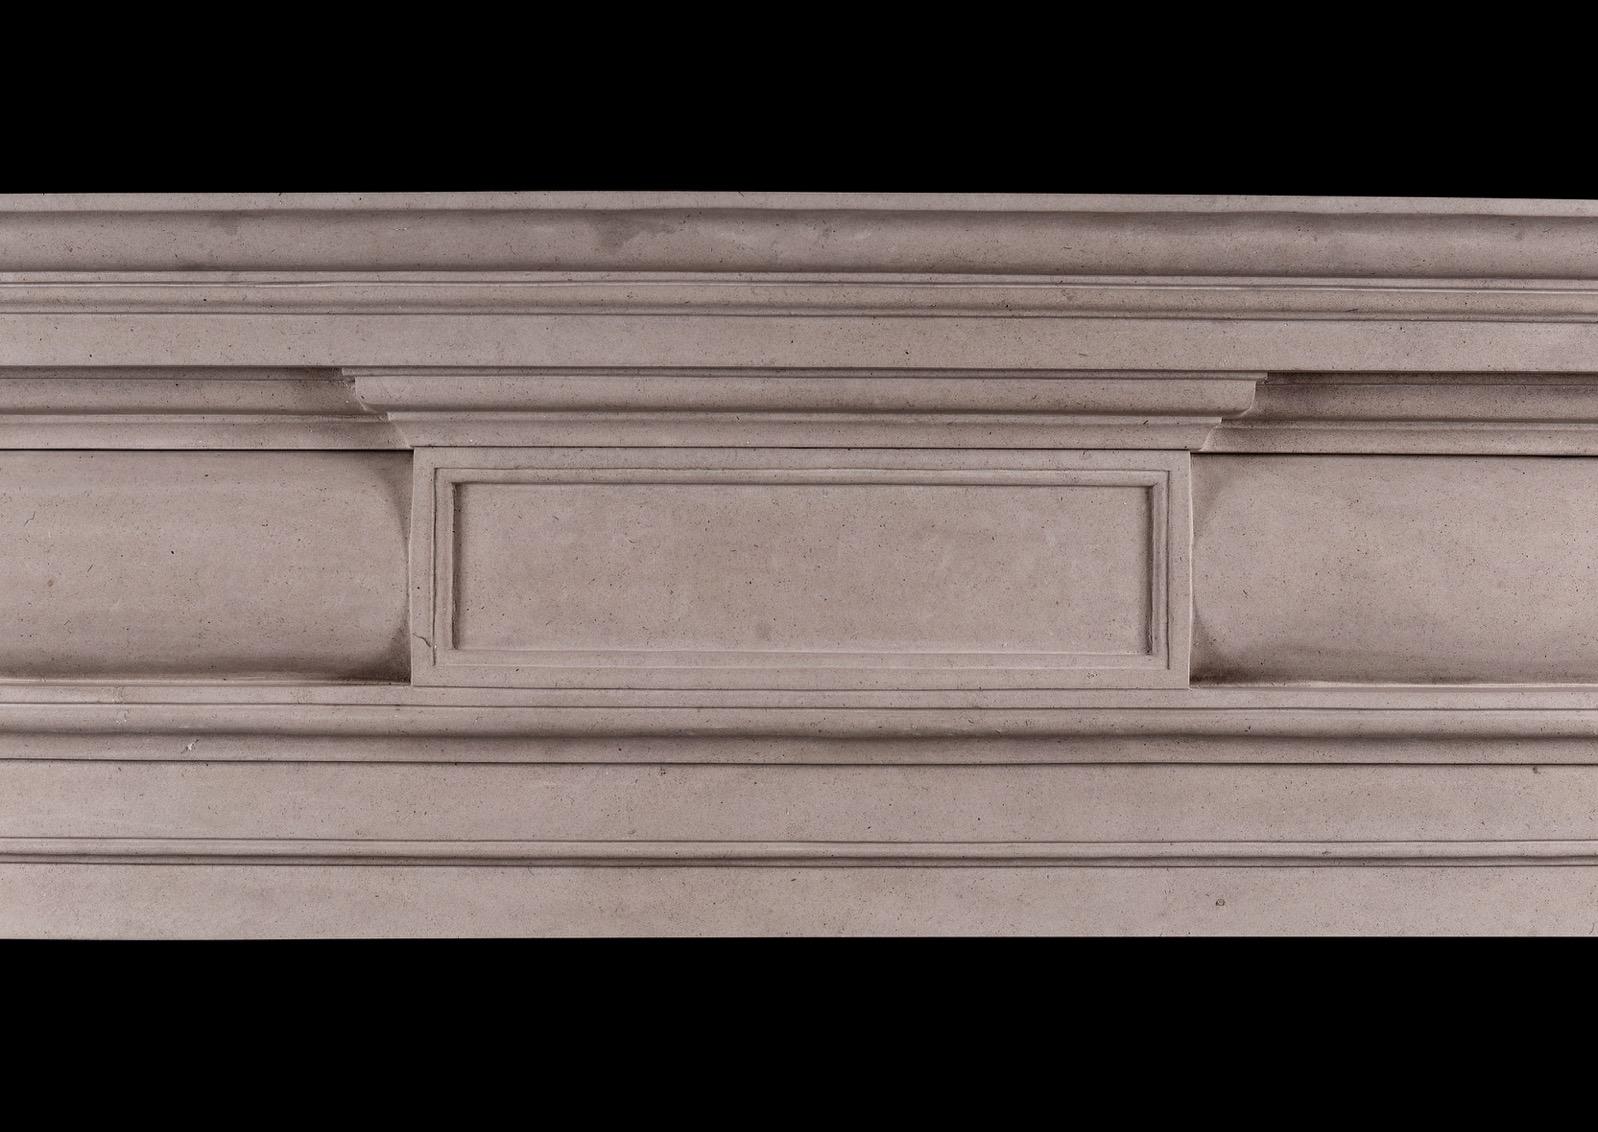 A good quality English Georgian style fireplace in Portland stone. The barrel frieze with centre panel, surmounted by moulded shelf. A fine quality copy of a period piece. N.B. May be subject to an extended lead time, please enquire for more